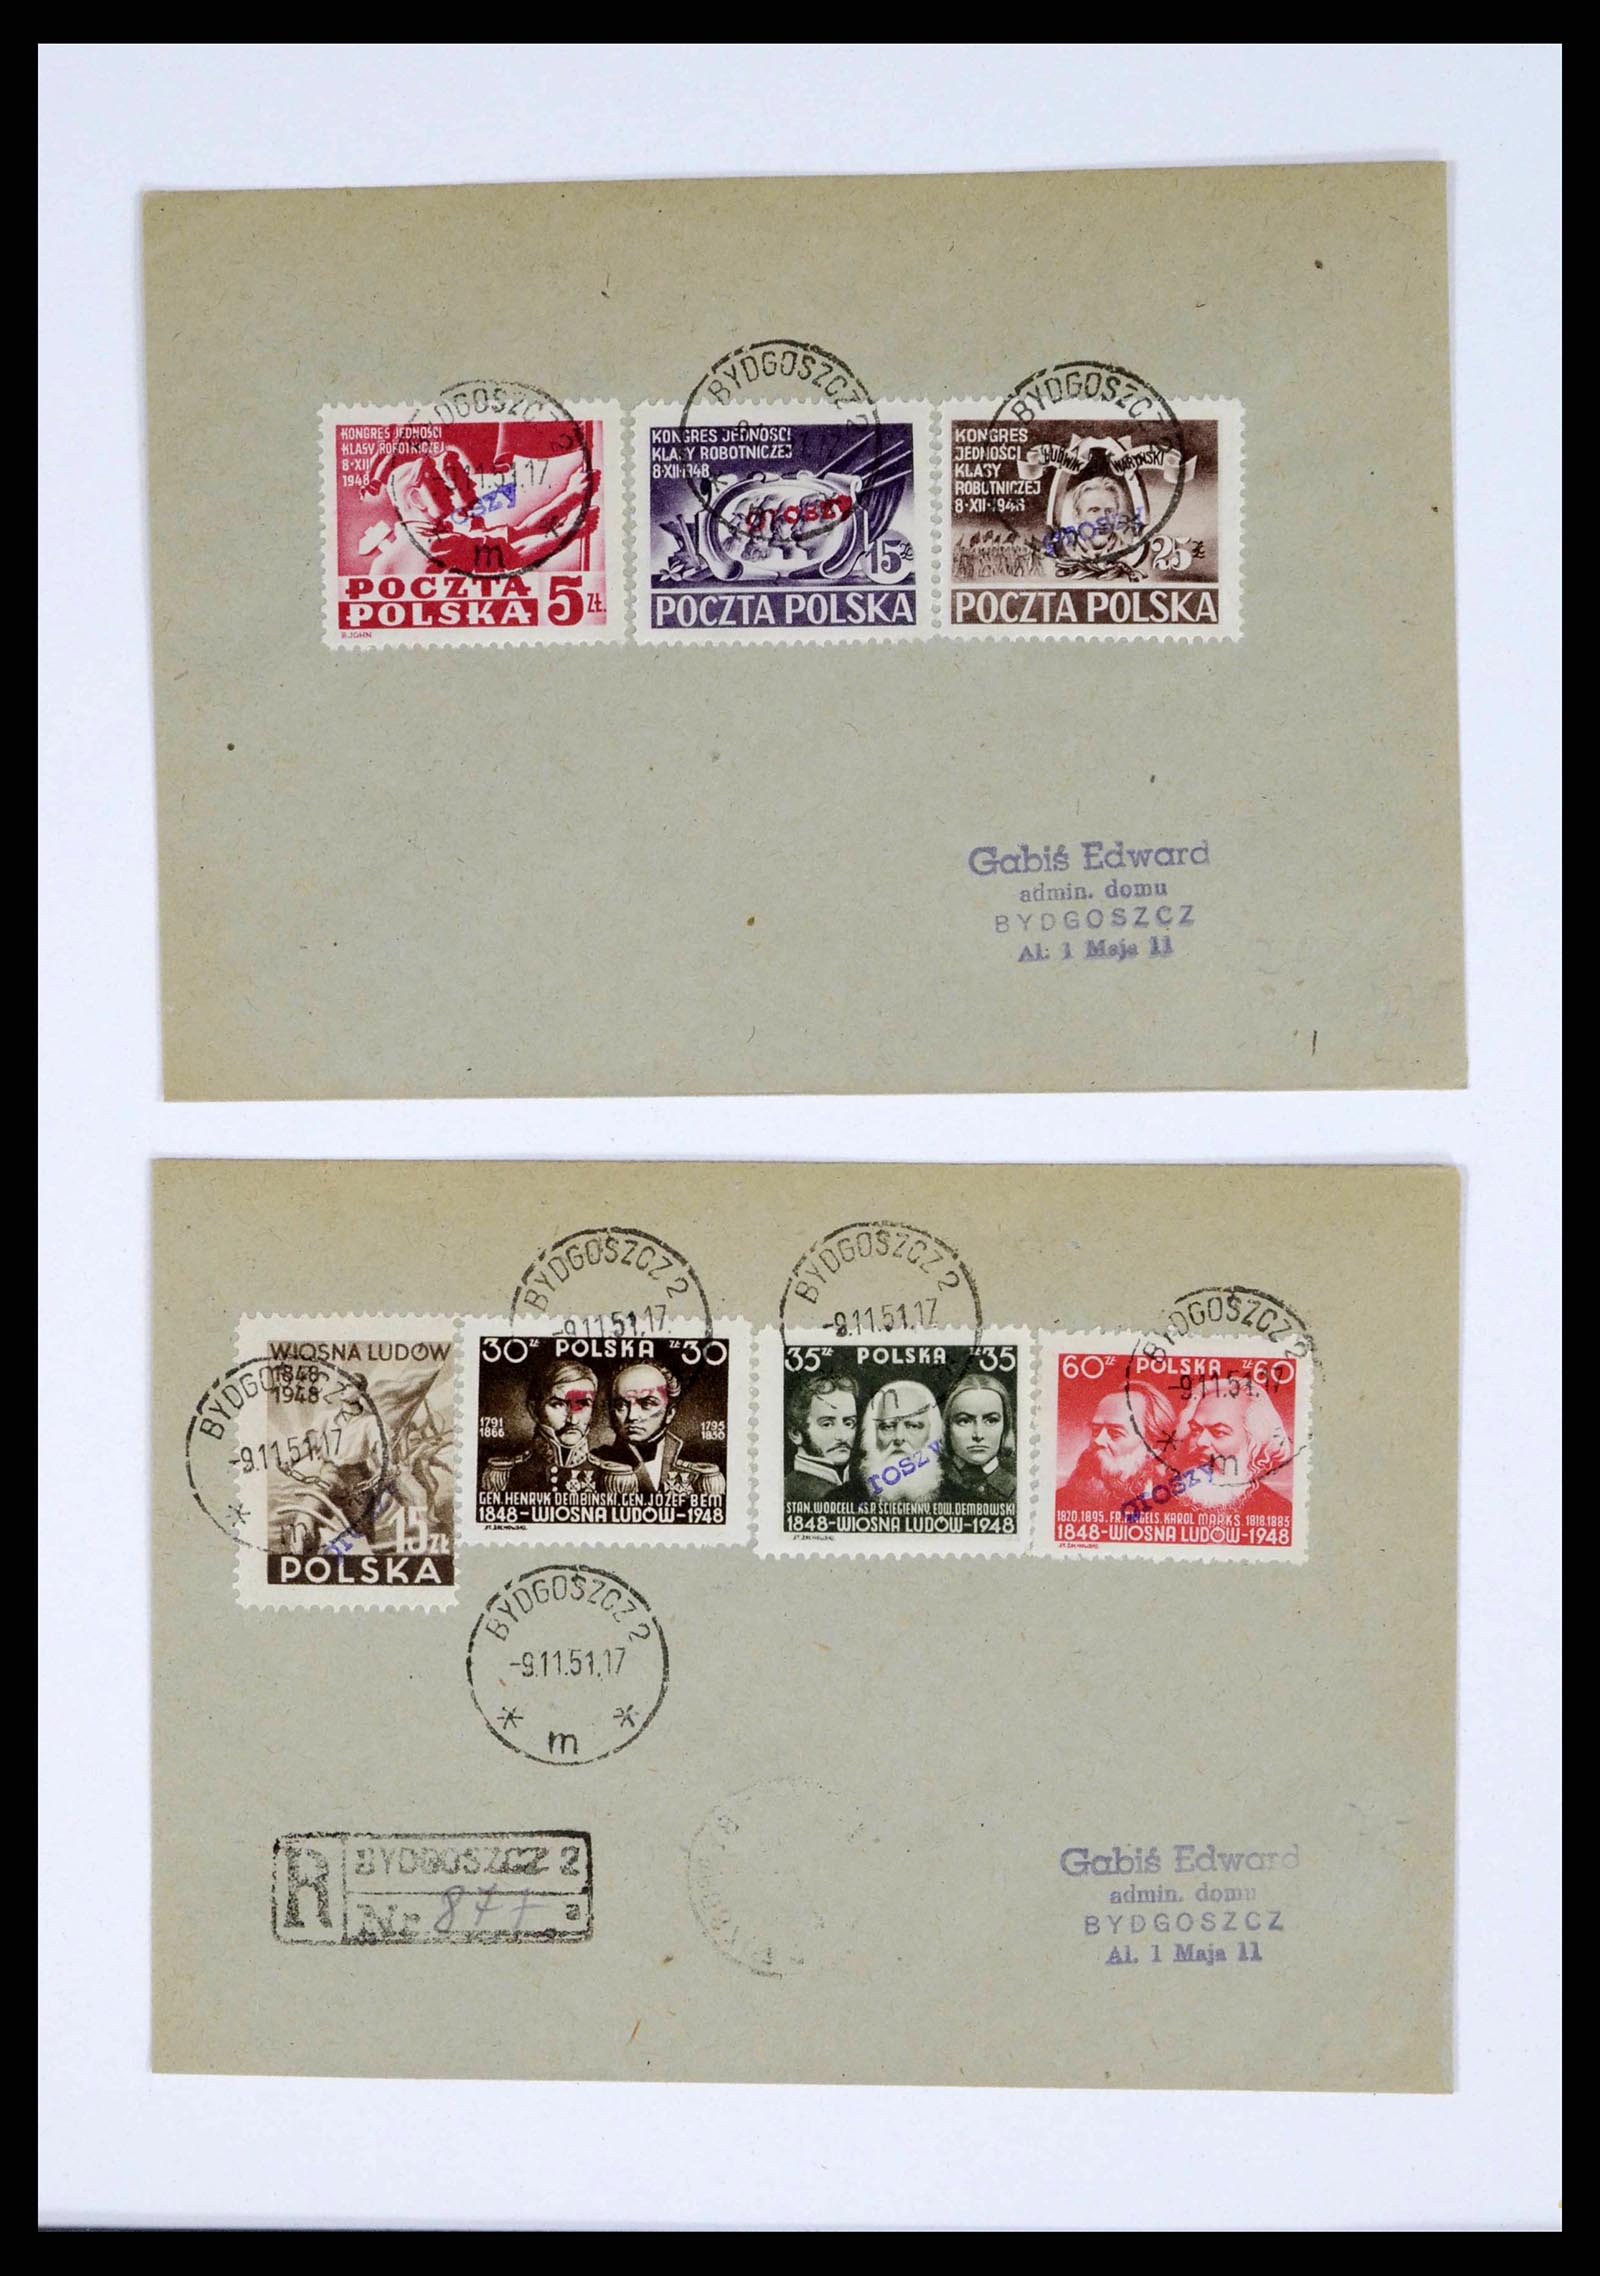 38201 0026 - Stamp collection 38201 Groszy overprints on cover 1950-1951.